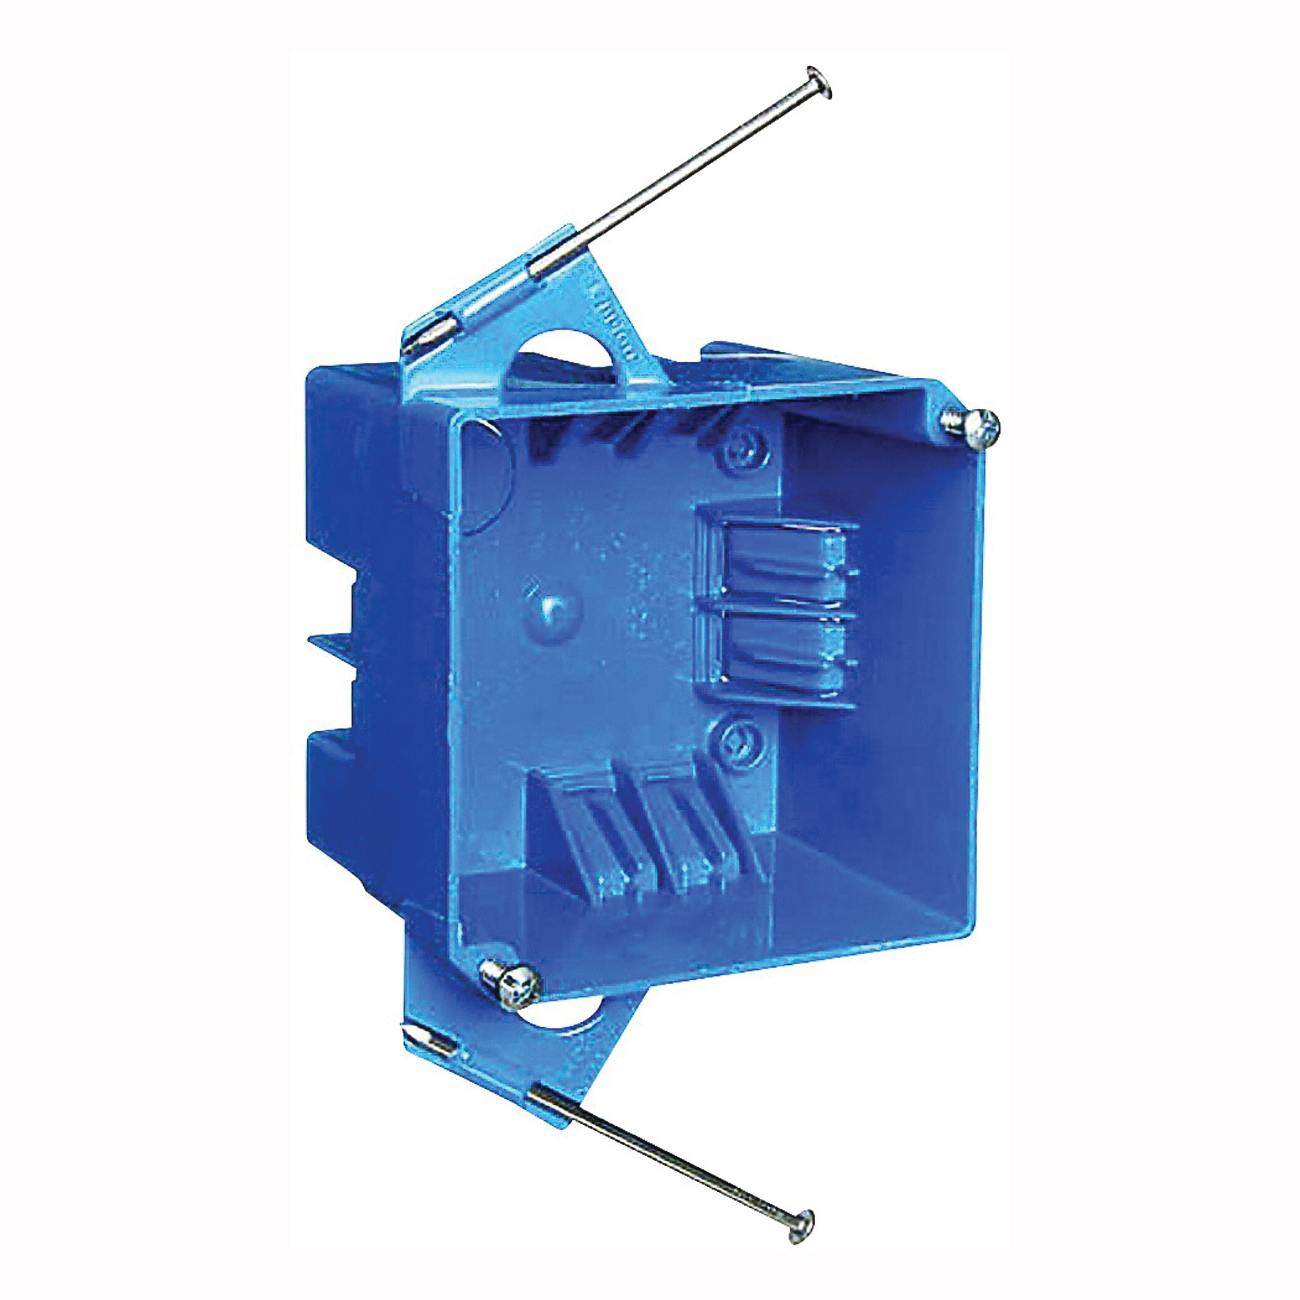 B432A-UPC Outlet Box, 4 -Gang, Thermoplastic, Blue, Captive Nail Mounting